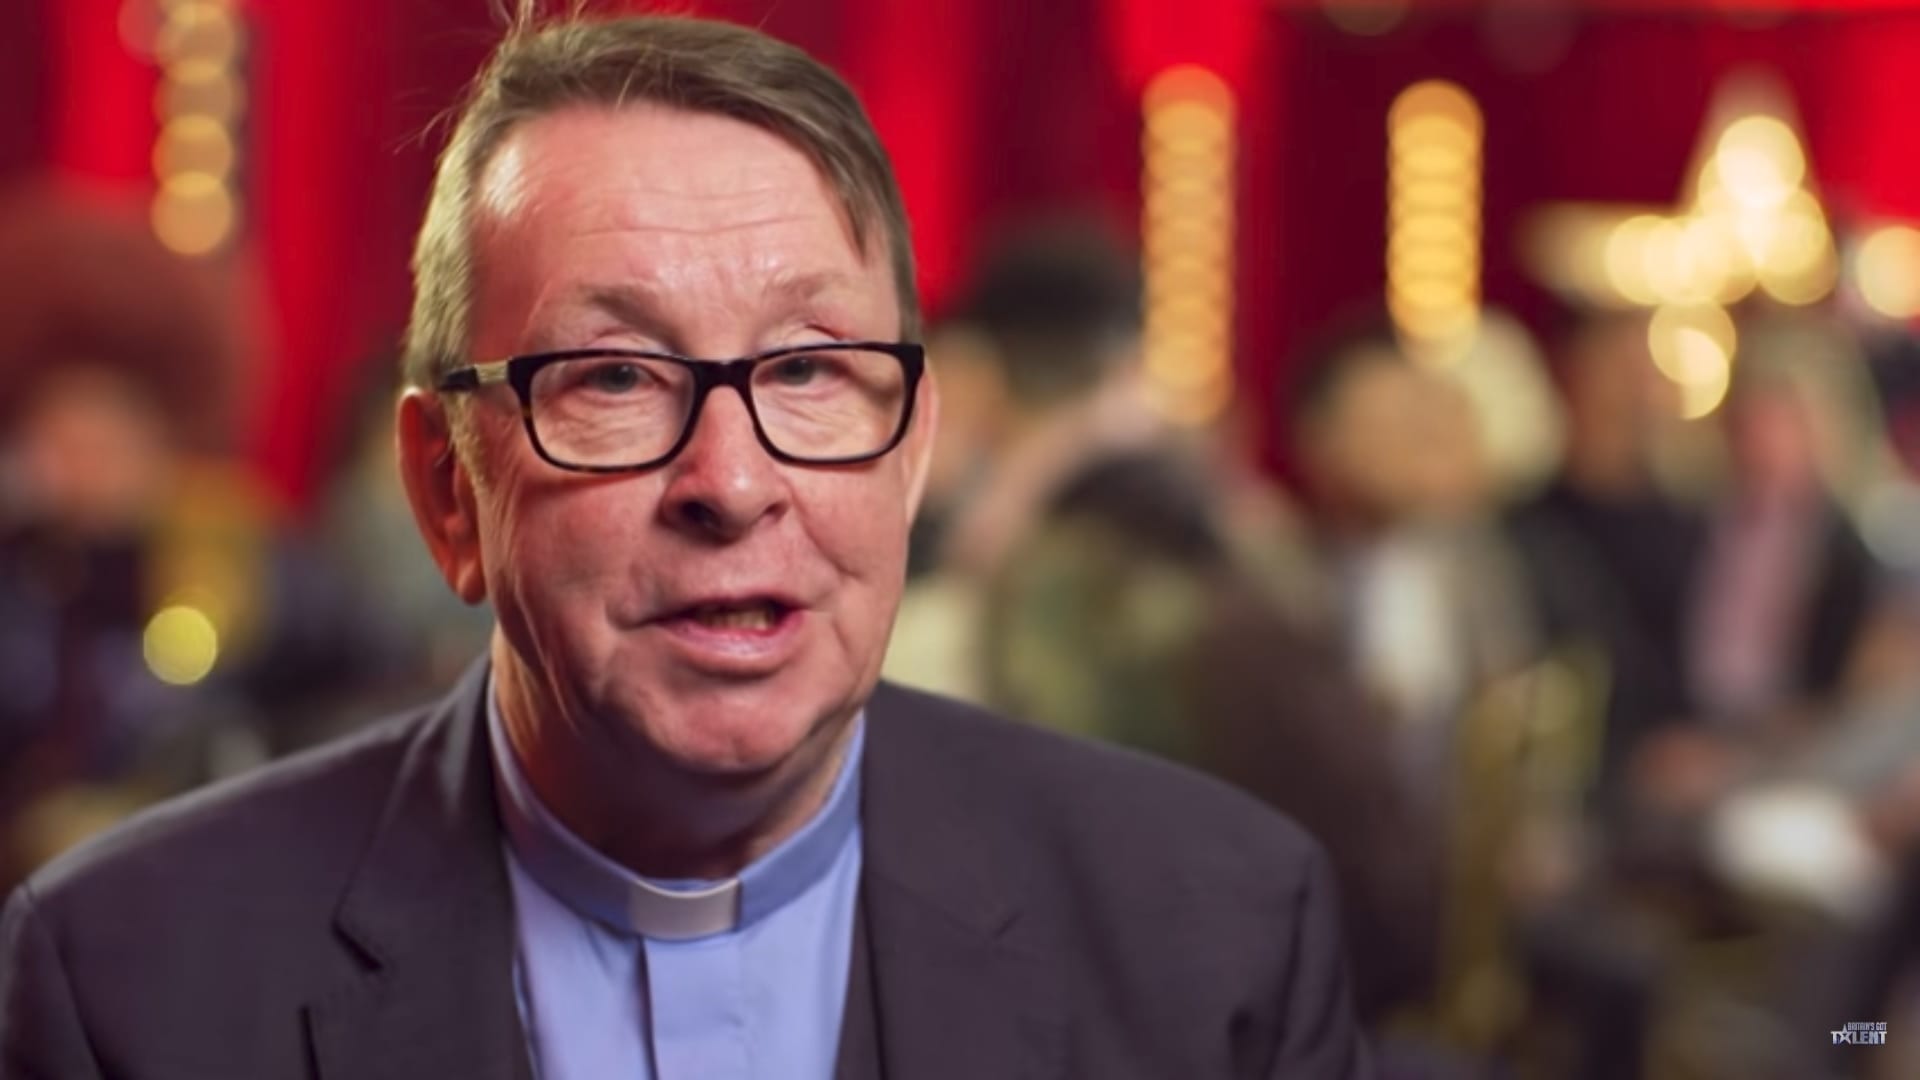 Viral singing priest hopes Pope will spark new vocations in Ireland